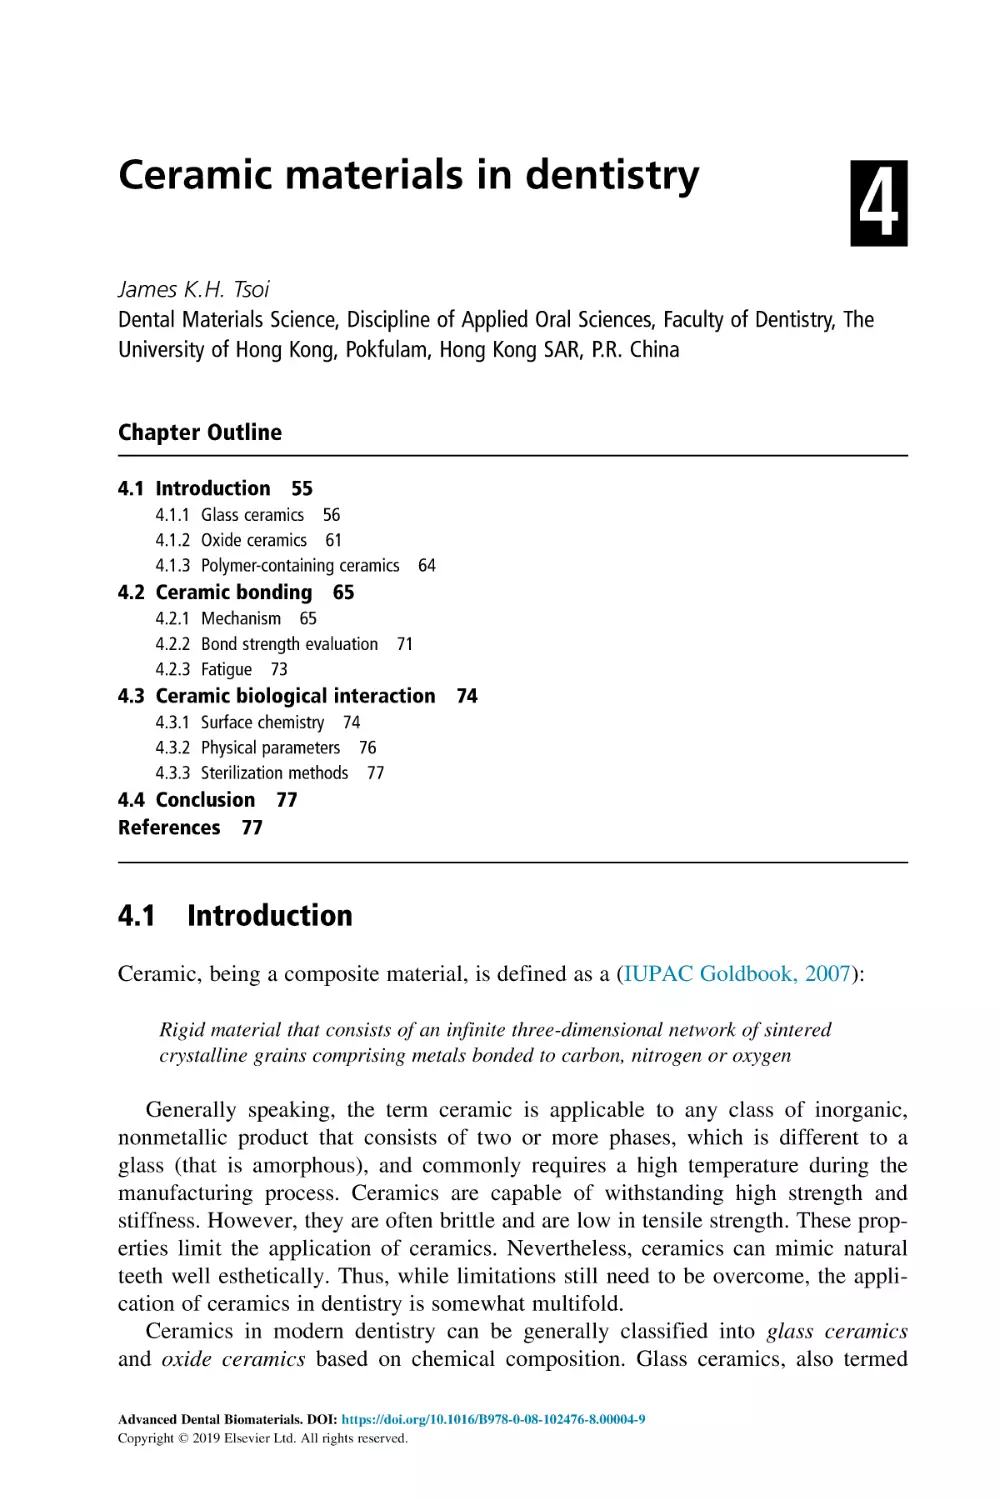 4 Ceramic materials in dentistry
Chapter Outline
4.1 Introduction